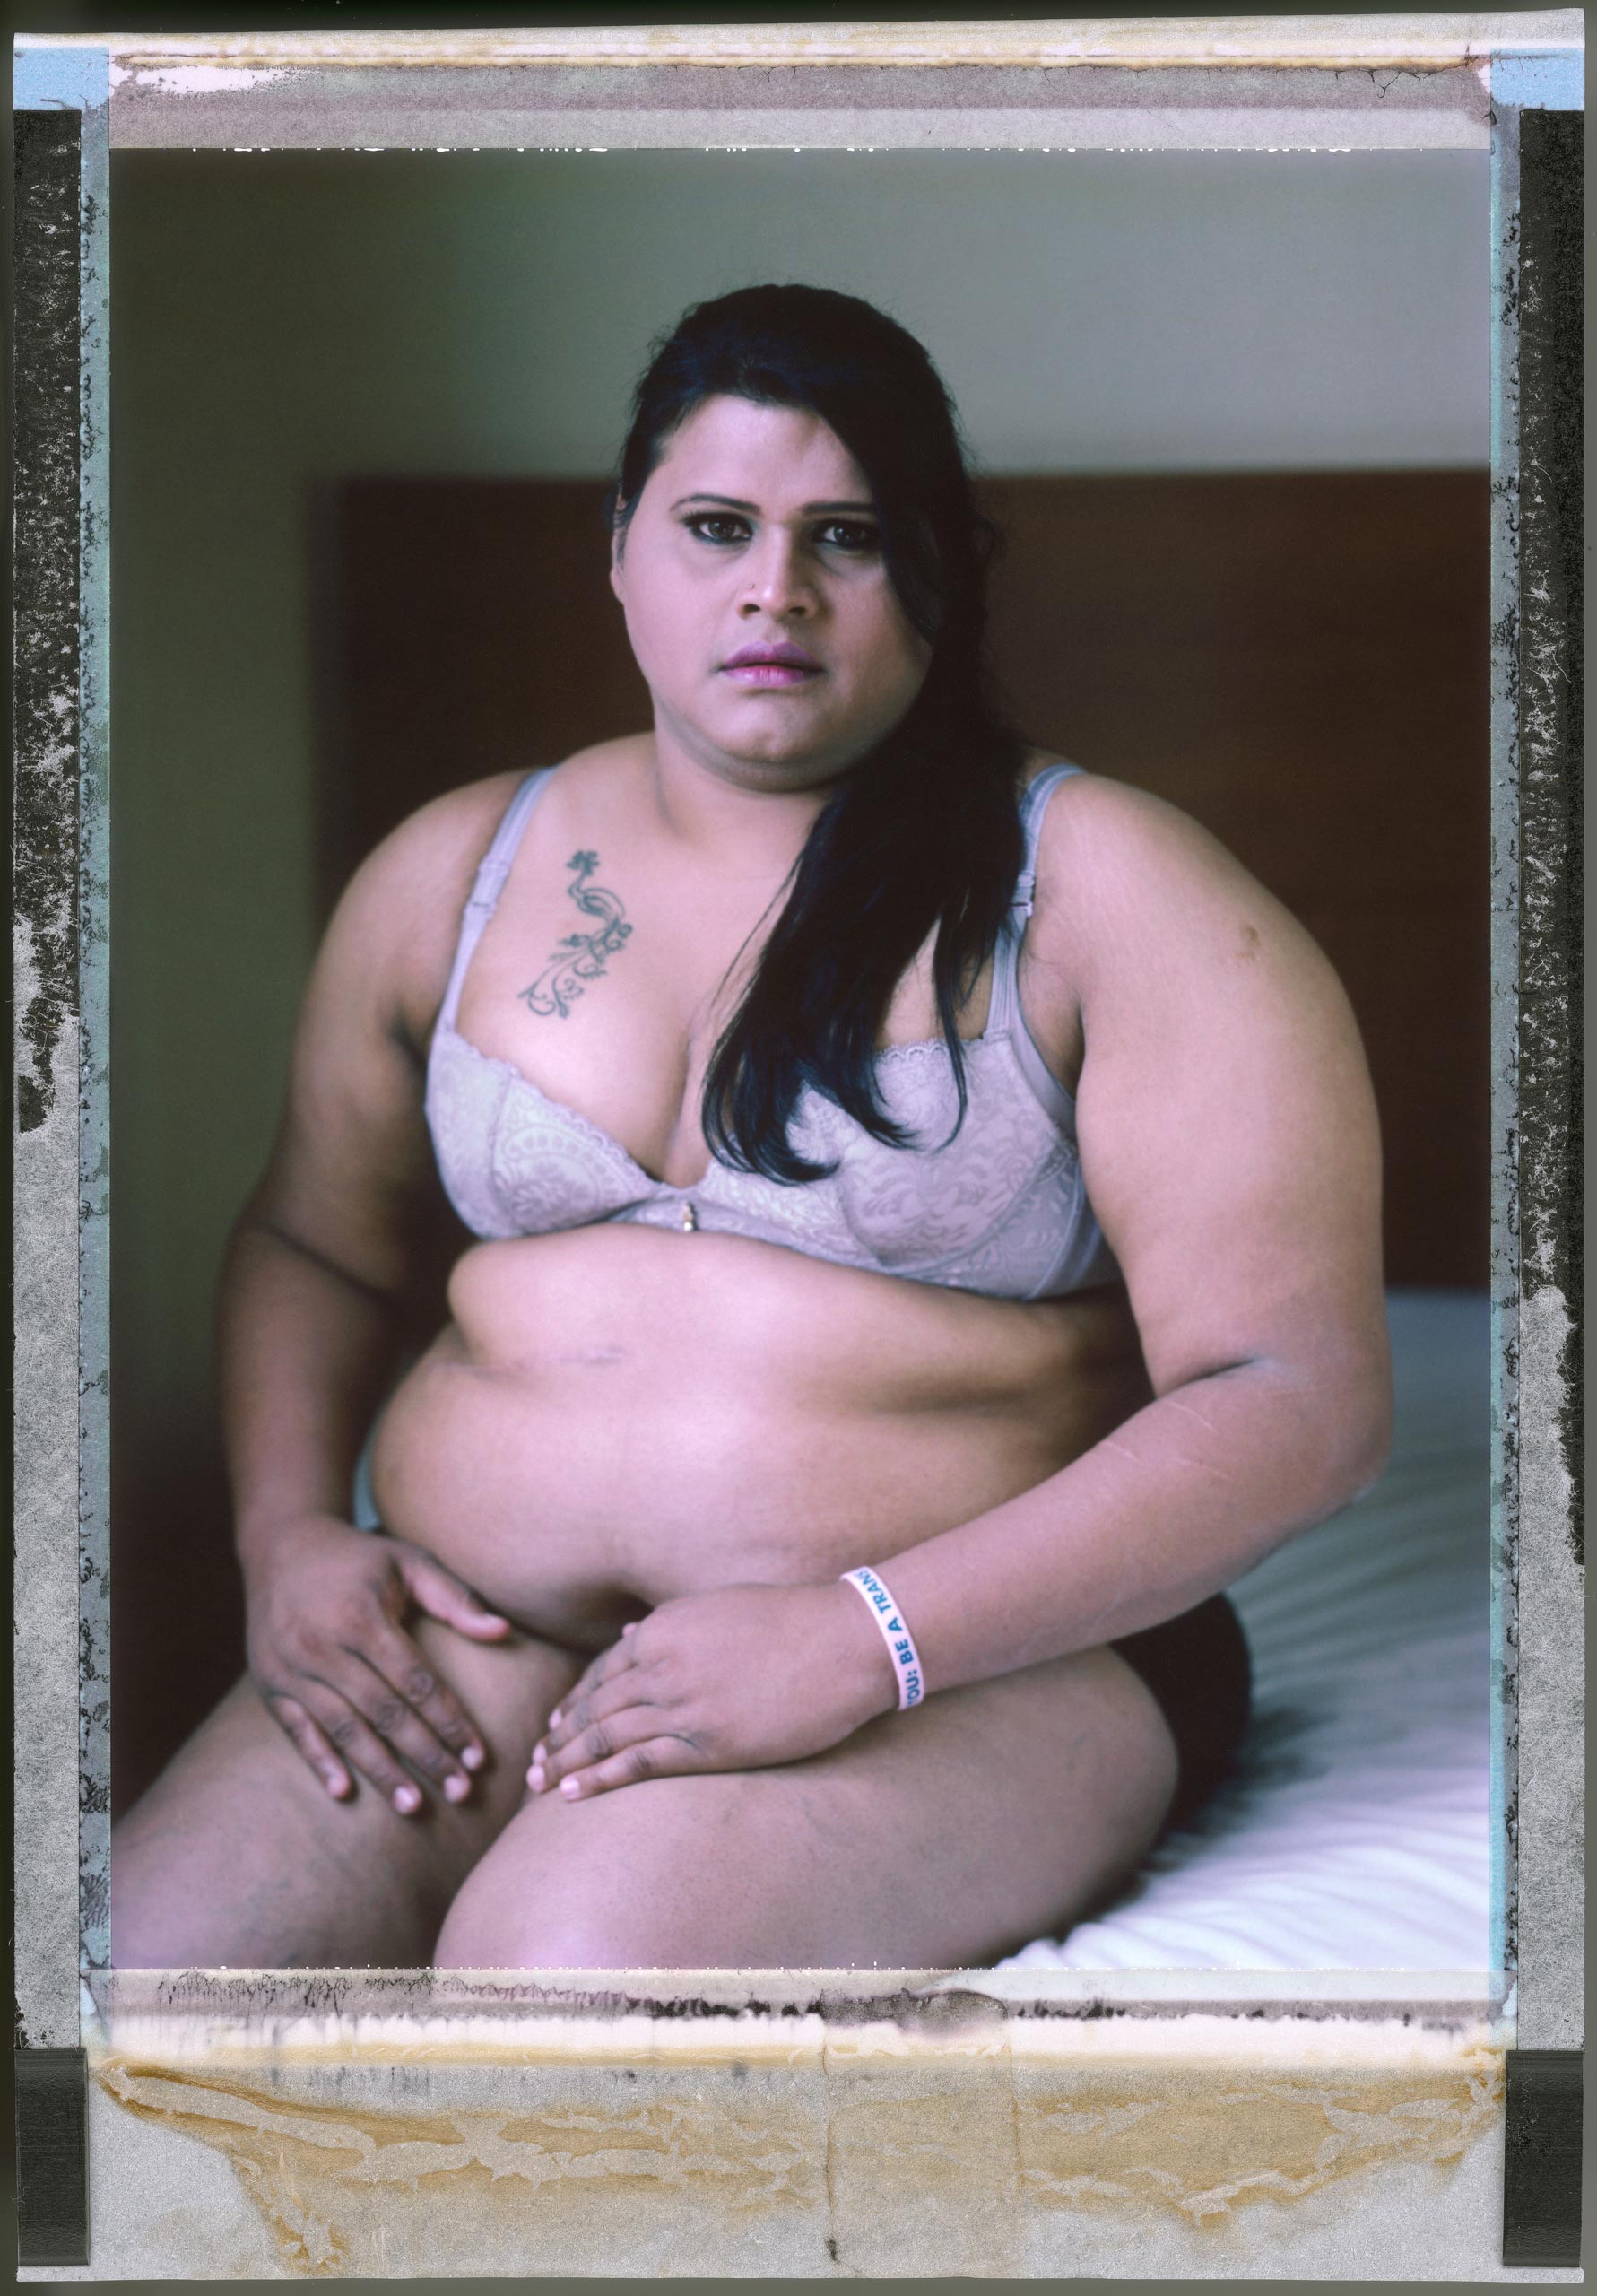 A posed portrait of 33 Year old Abinaya Jayaraman, a transgender woman. Until the age of 19 she always considered herself a normal boy. It wasn’t until her late teens when other boys started to isolate her that she started to question herself. She googled “a man with female character” and started to learn about the transgender community. She went to see a doctor who told her she had a female’s soul trapped in a male’s body. At first she strongly rejected the idea. She wanted to tell her mum but she is from a very strict family and didn’t think it was possible. “I was so scared to tell her, and I started to cut my arm due to depression. I used to hate myself, and I used to hate God “Why did you create me this way?” It took me more than three years to accept who I am. Then I started to dress up in the house. And I would see my mum’s Saree and think “when will it be my turn to wear that?”. In June 2008 she told her mum “Ma, I’m not a boy, I’m a girl, please understand” Abinaya’s mother slapped her in the face and walked away. One evening in 2009, Abinaya came home after work “all my relatives were there. I asked “what’s going on?” – my mother told me – “we’re going to look for a wife for you” I was shocked. I said “what? Please understand I cannot carry her leg like this and bang her!”” Her mother replied “Don’t worry, once you have a child, everything will be okay”. Her relatives tried to introduce her to a woman. Abinaya met her wife to be, and told her “Look I can’t marry you” then Abinaya explained everything. The pressure continued though until Abinaya couldn’t take it any longer and in April 2009 she took a cocktail of sleeping pills and pain killers in an attempt to end her life. She ended up in hospital for 3 months. Her mother didn’t visit her once. Abinaya’s family continued to refuse to accept her gender identity. She was disowned and thrown out of the house. Abinaya worked in corpor